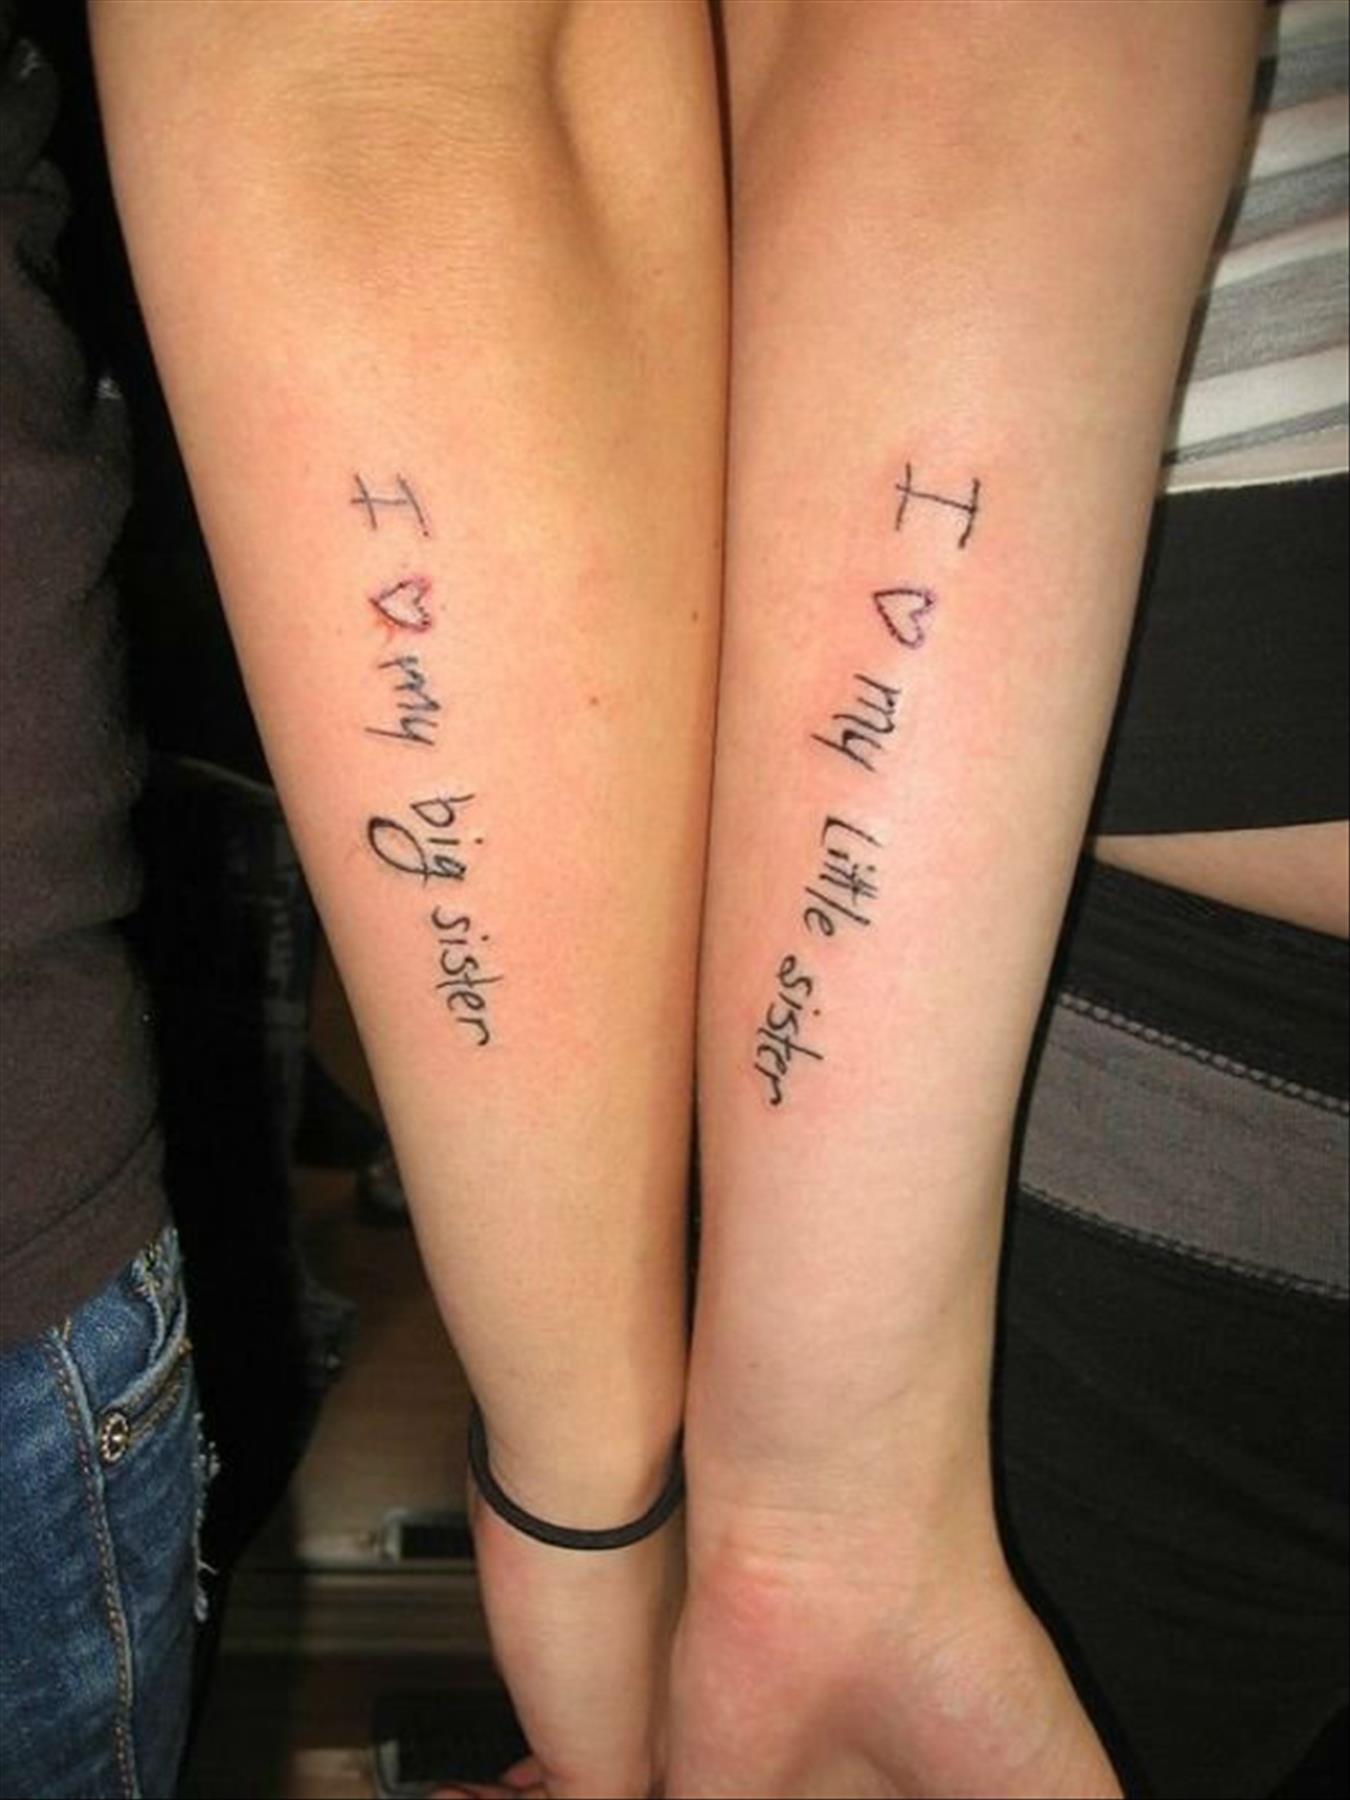 Best sister tattoo ideas with meanings